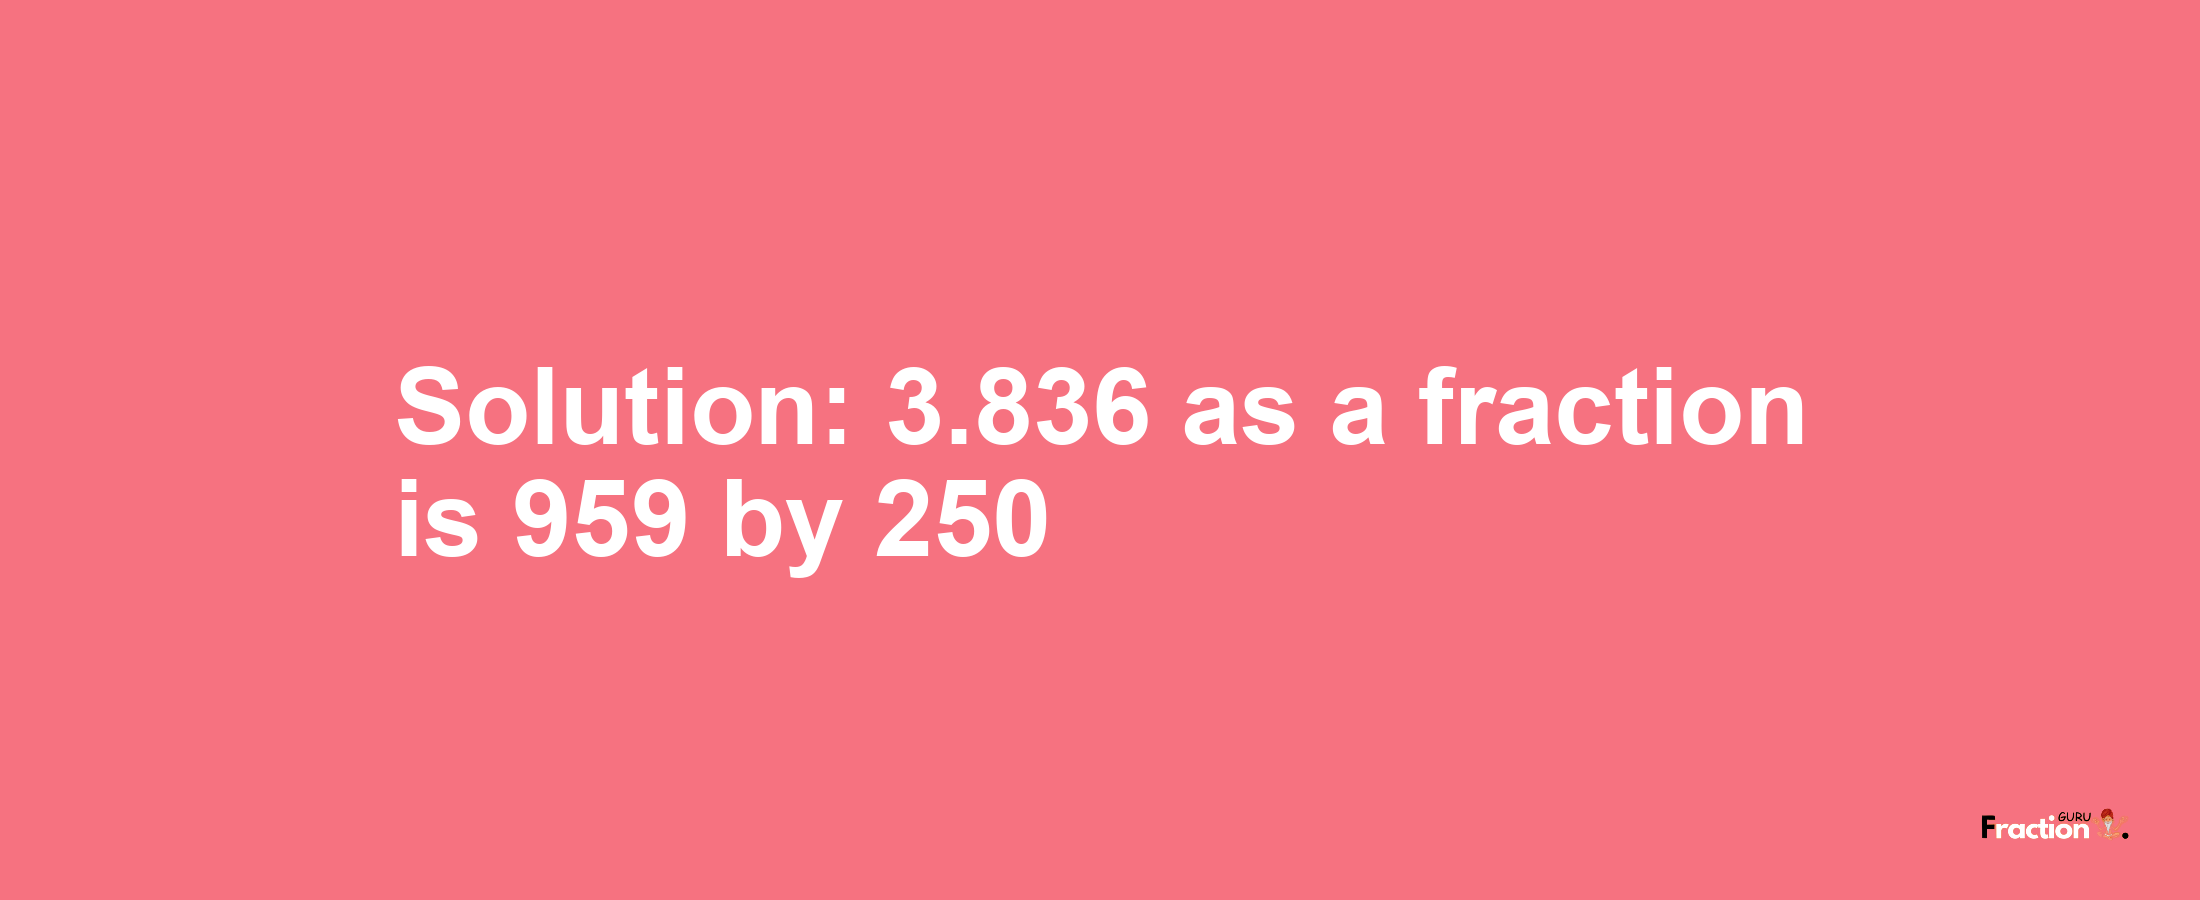 Solution:3.836 as a fraction is 959/250